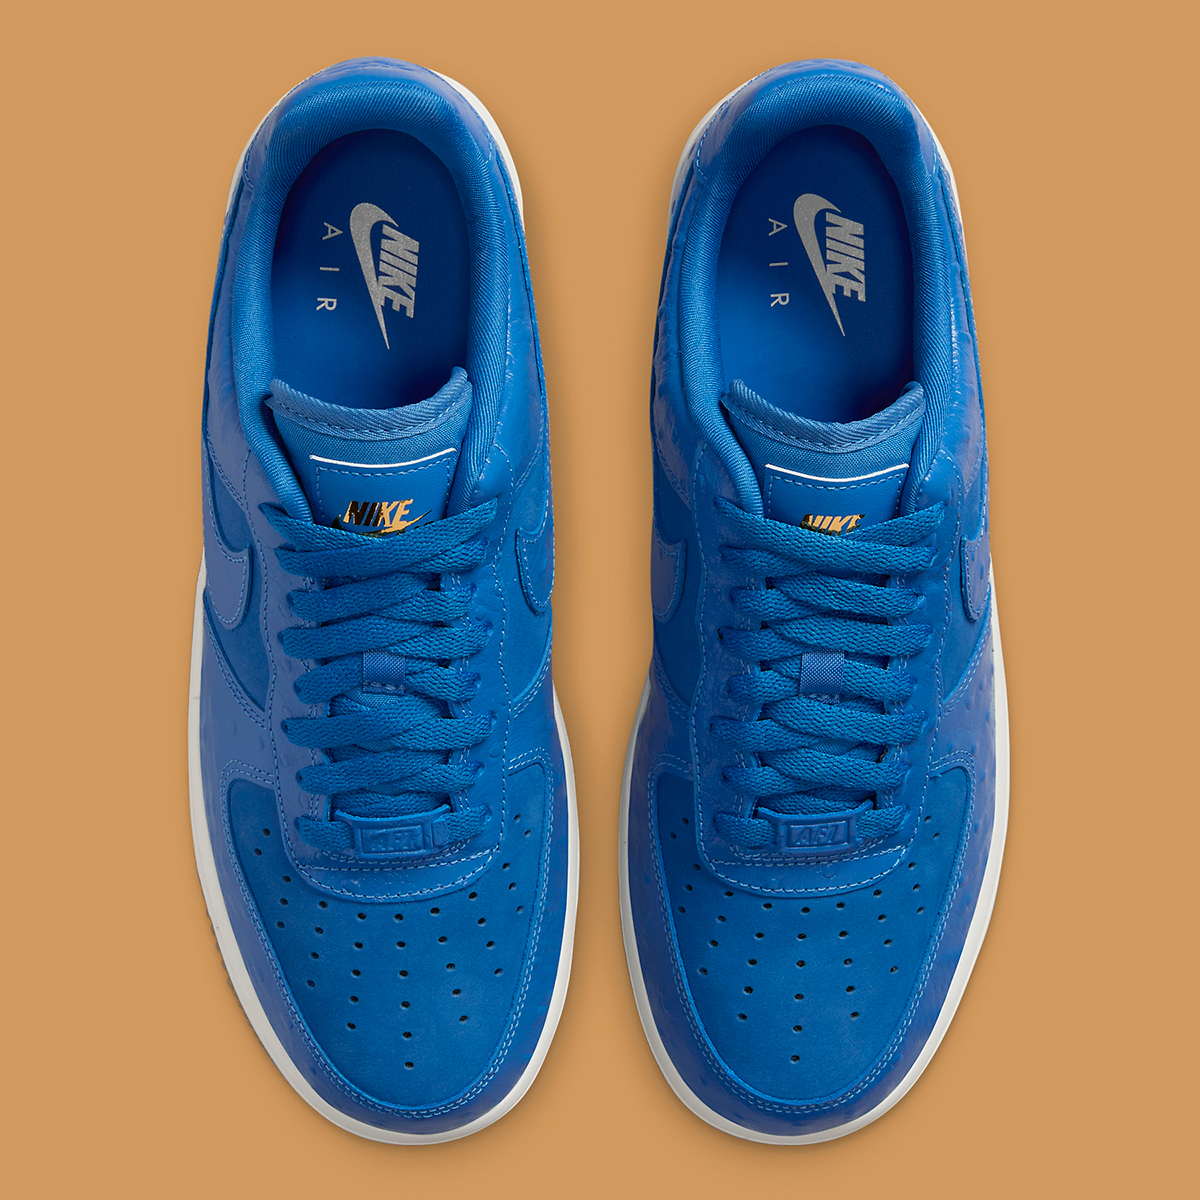 the legendary Nike Les SB joins forces with John Vitales Low Blue Ostrich Dz2708 400 7